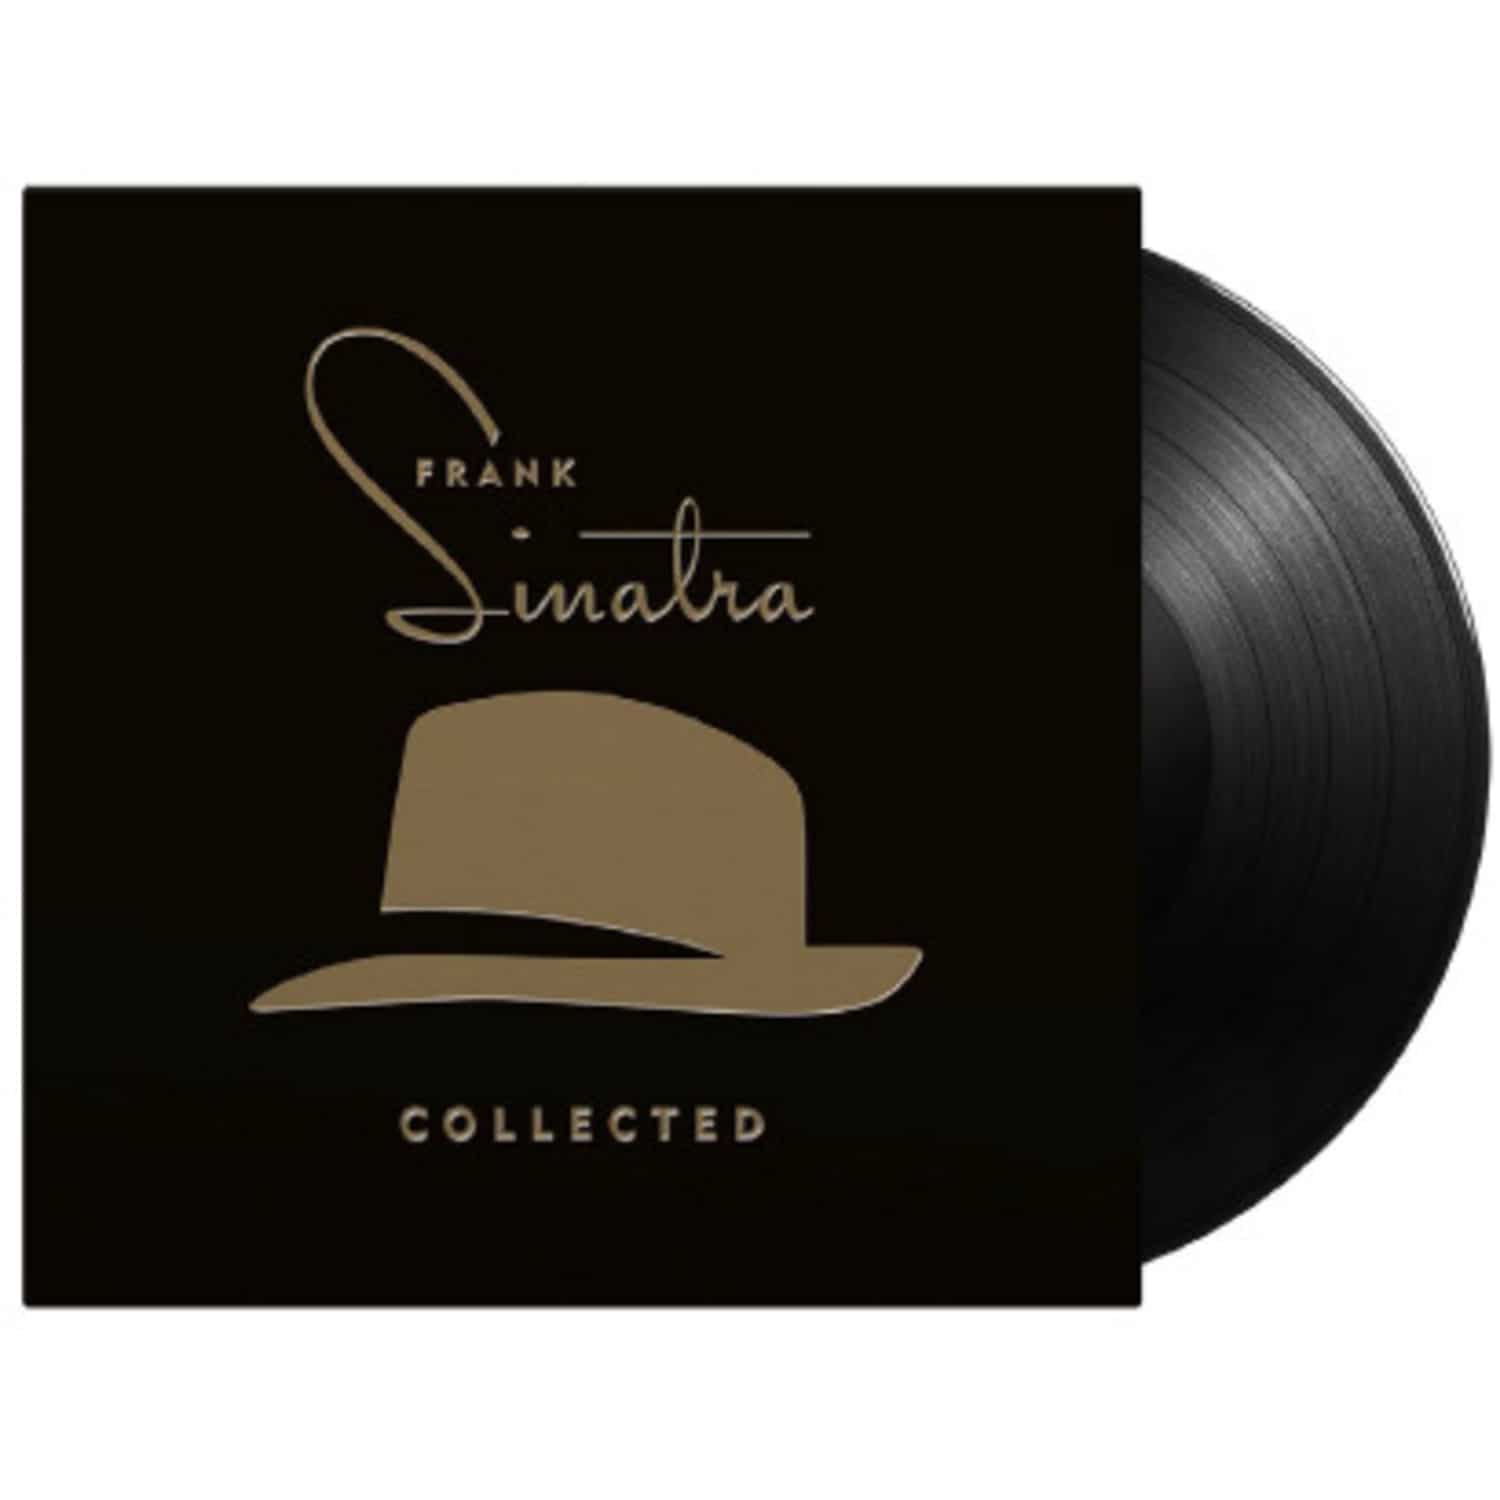 Frank Sinatra - COLLECTED 